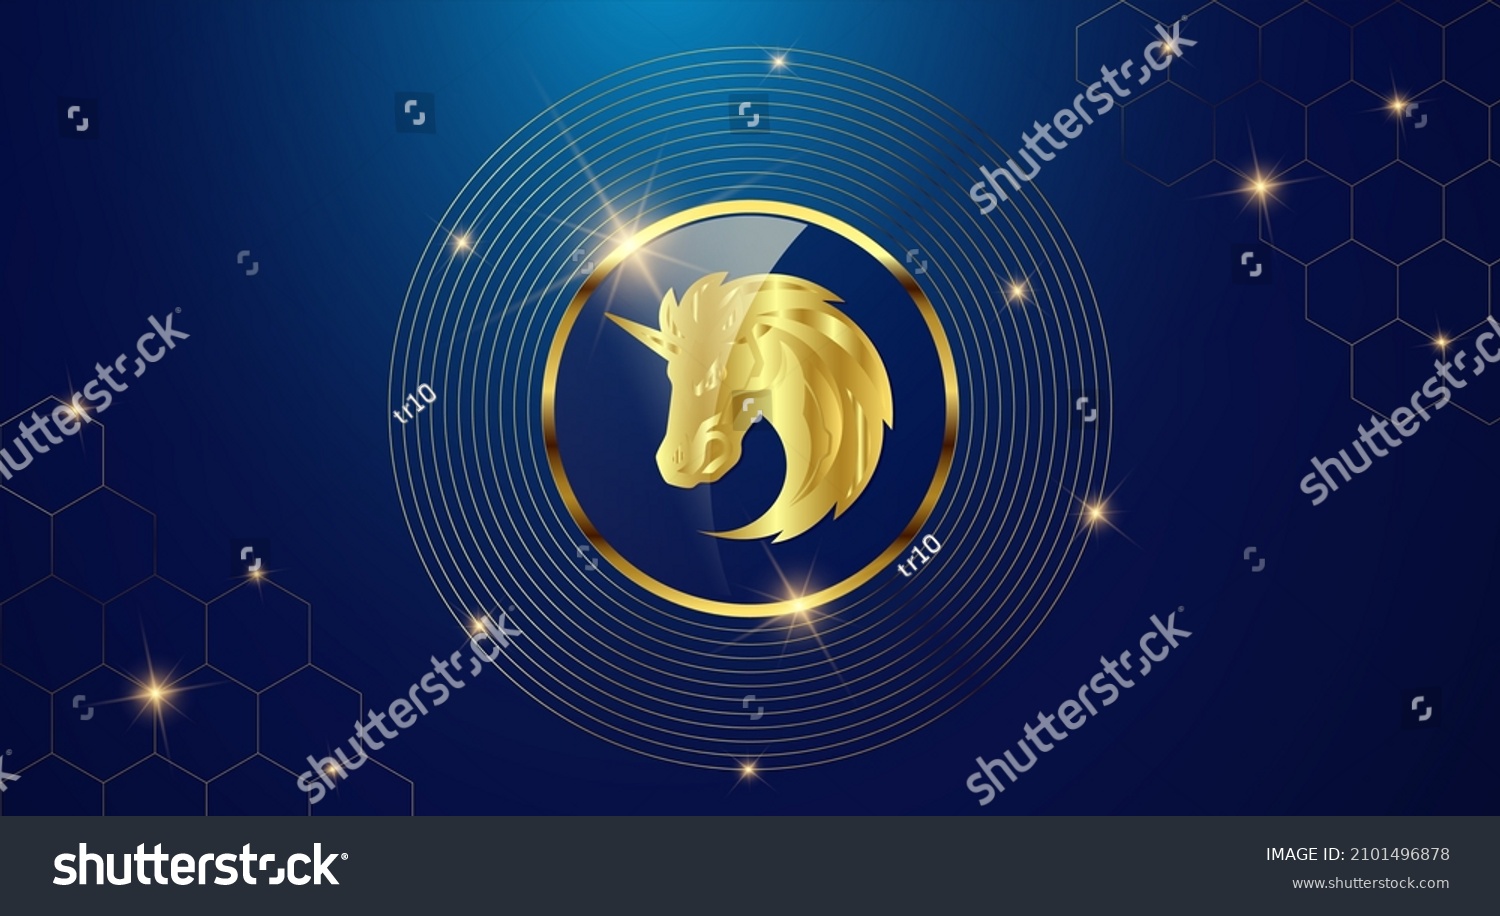 SVG of Token cryptocurrency 1inch Network( 1INCH ), Gold coin symbol in shiny gold circle. svg